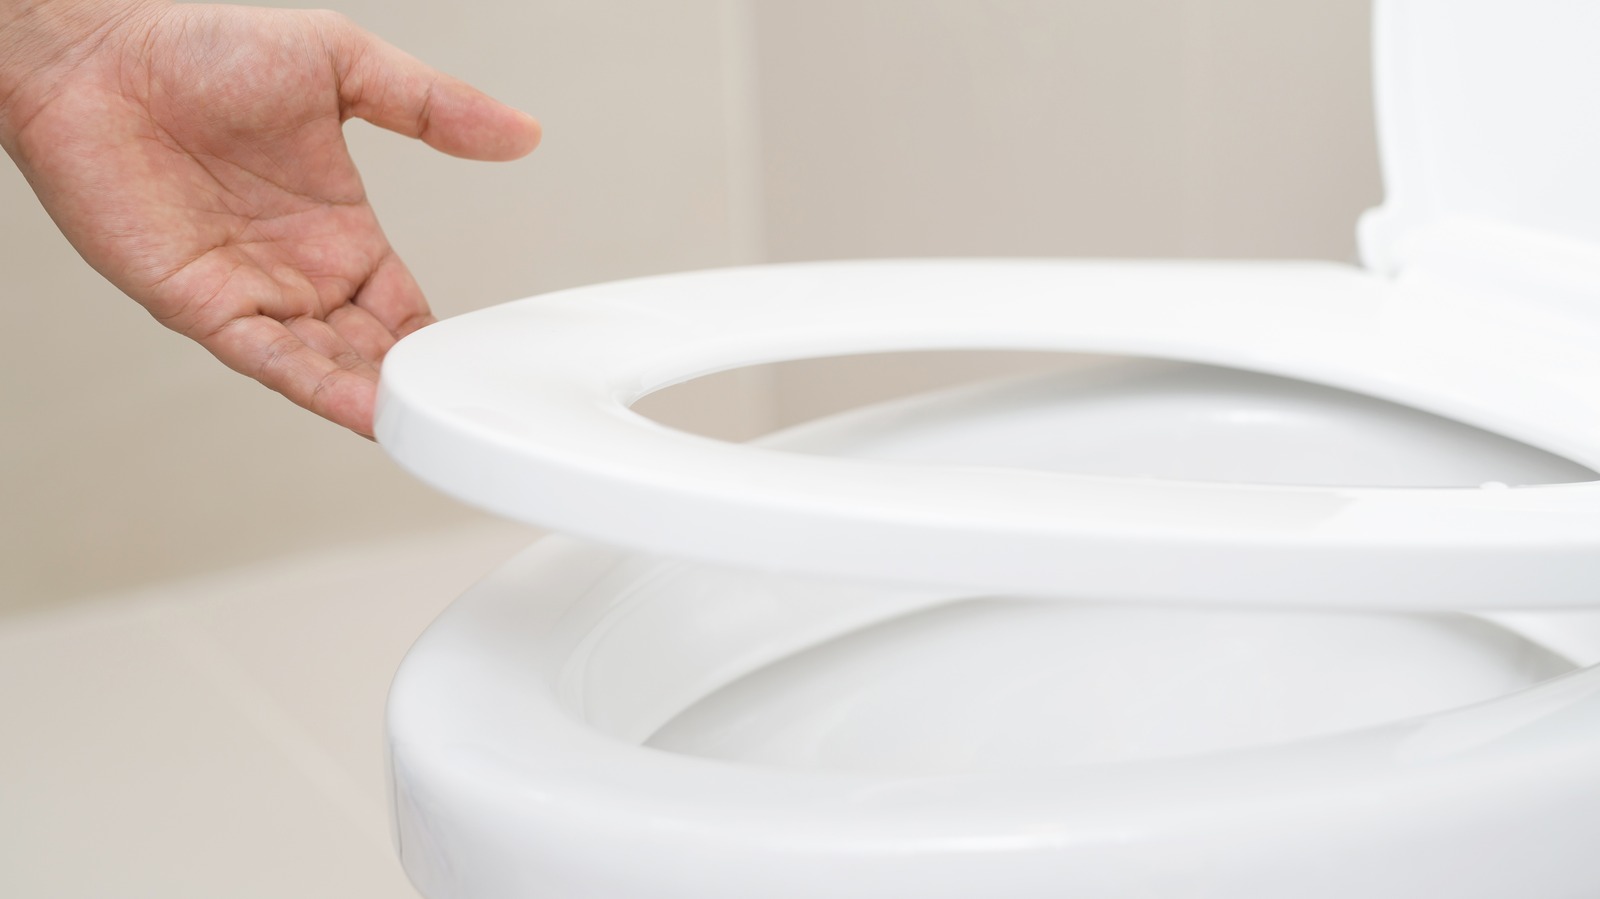 Avoid This Common Poop Mistake If You Don’t Want Hemorrhoids – Health Digest